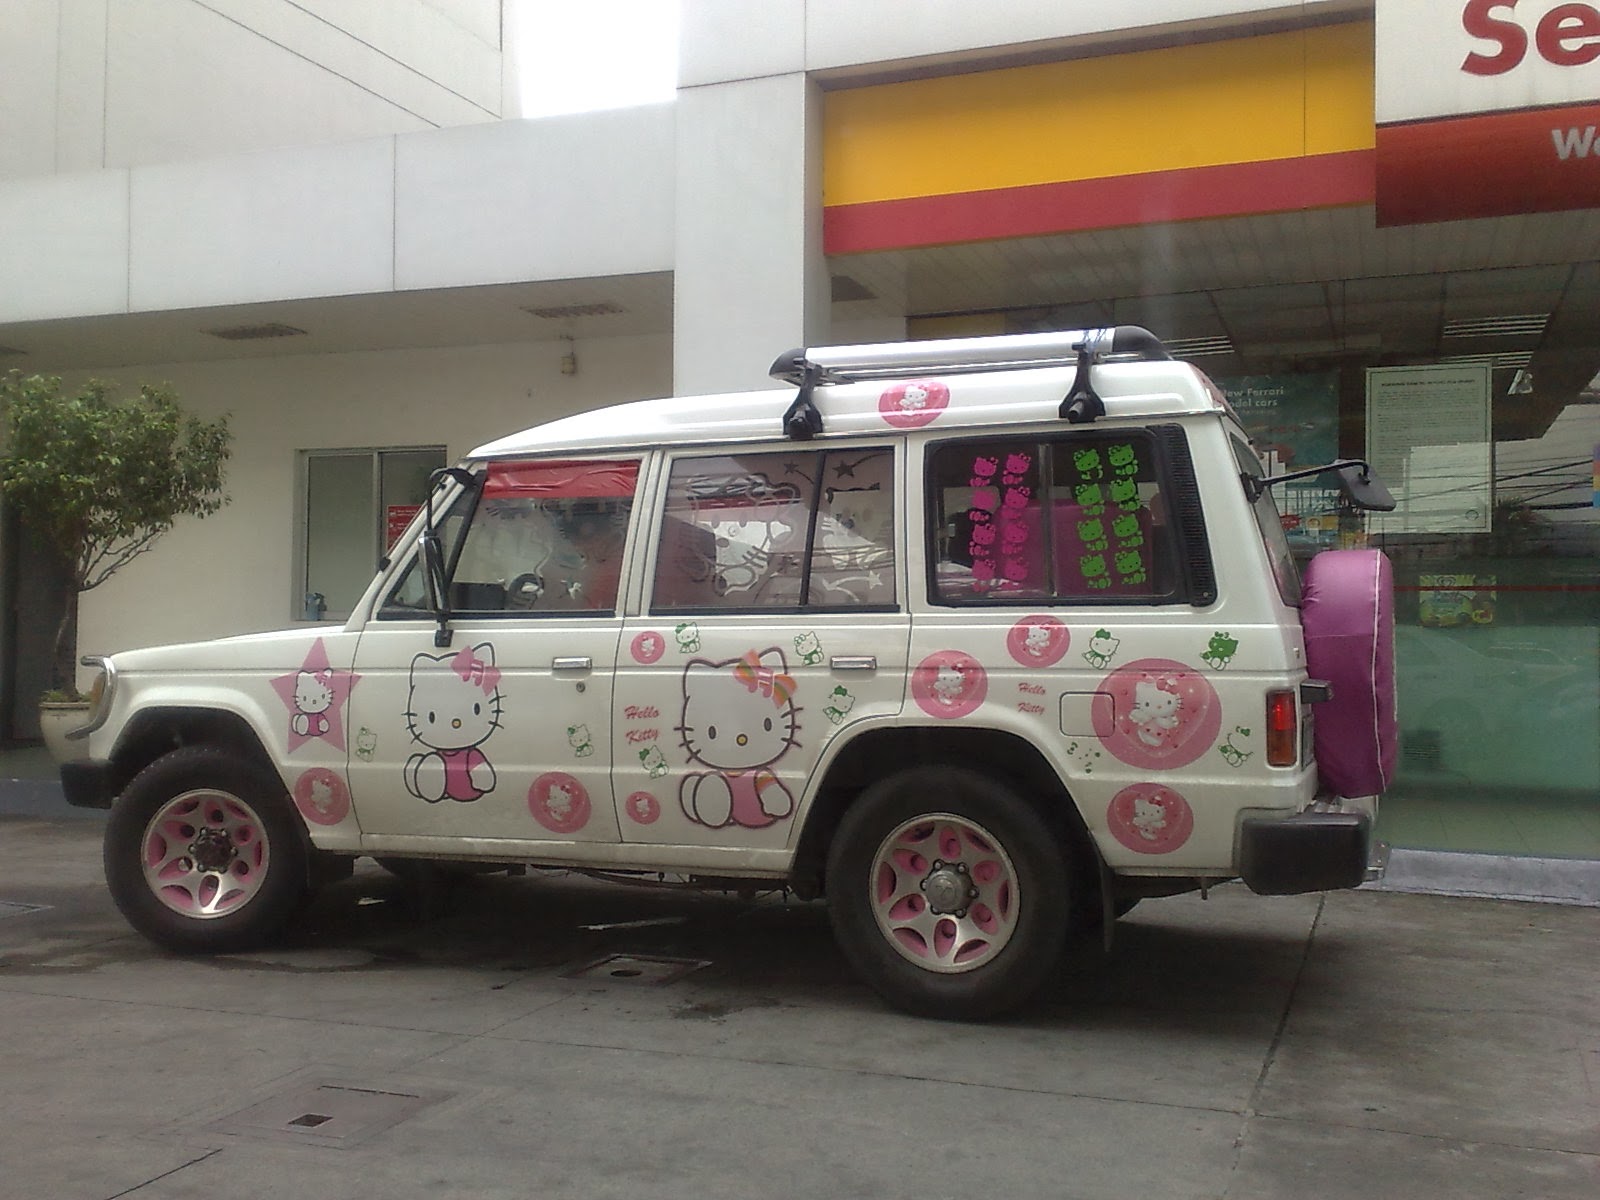 Of Pinks and Fairy Tales: Spotted: Hello Kitty Car